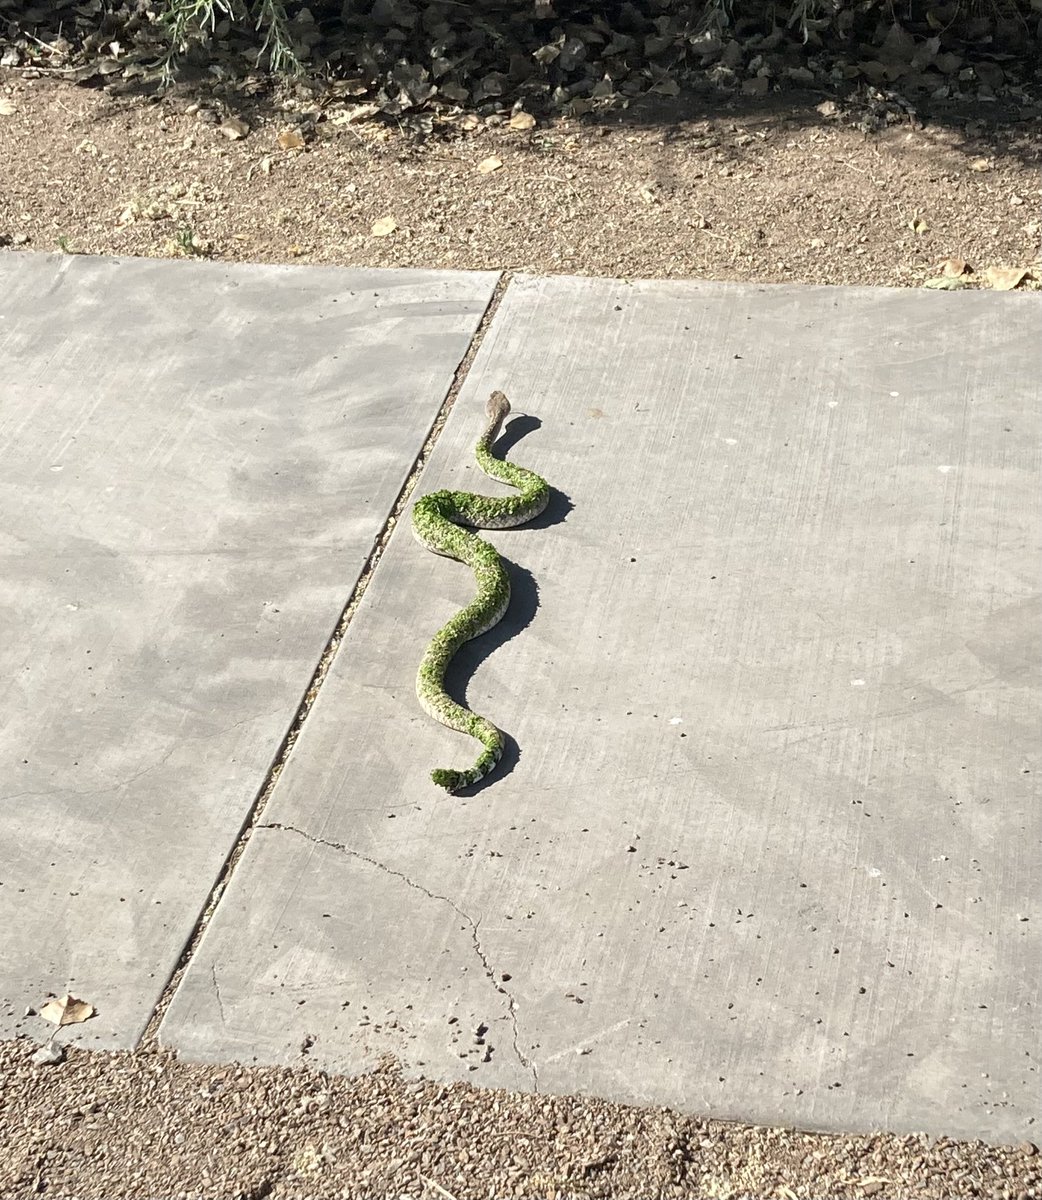 I thought this was a green snake crossing our path at Sweetwater Wetlands but it's a sidewinder rattlesnake covered in pond algae. (Photo credit: Mine) #Tucson